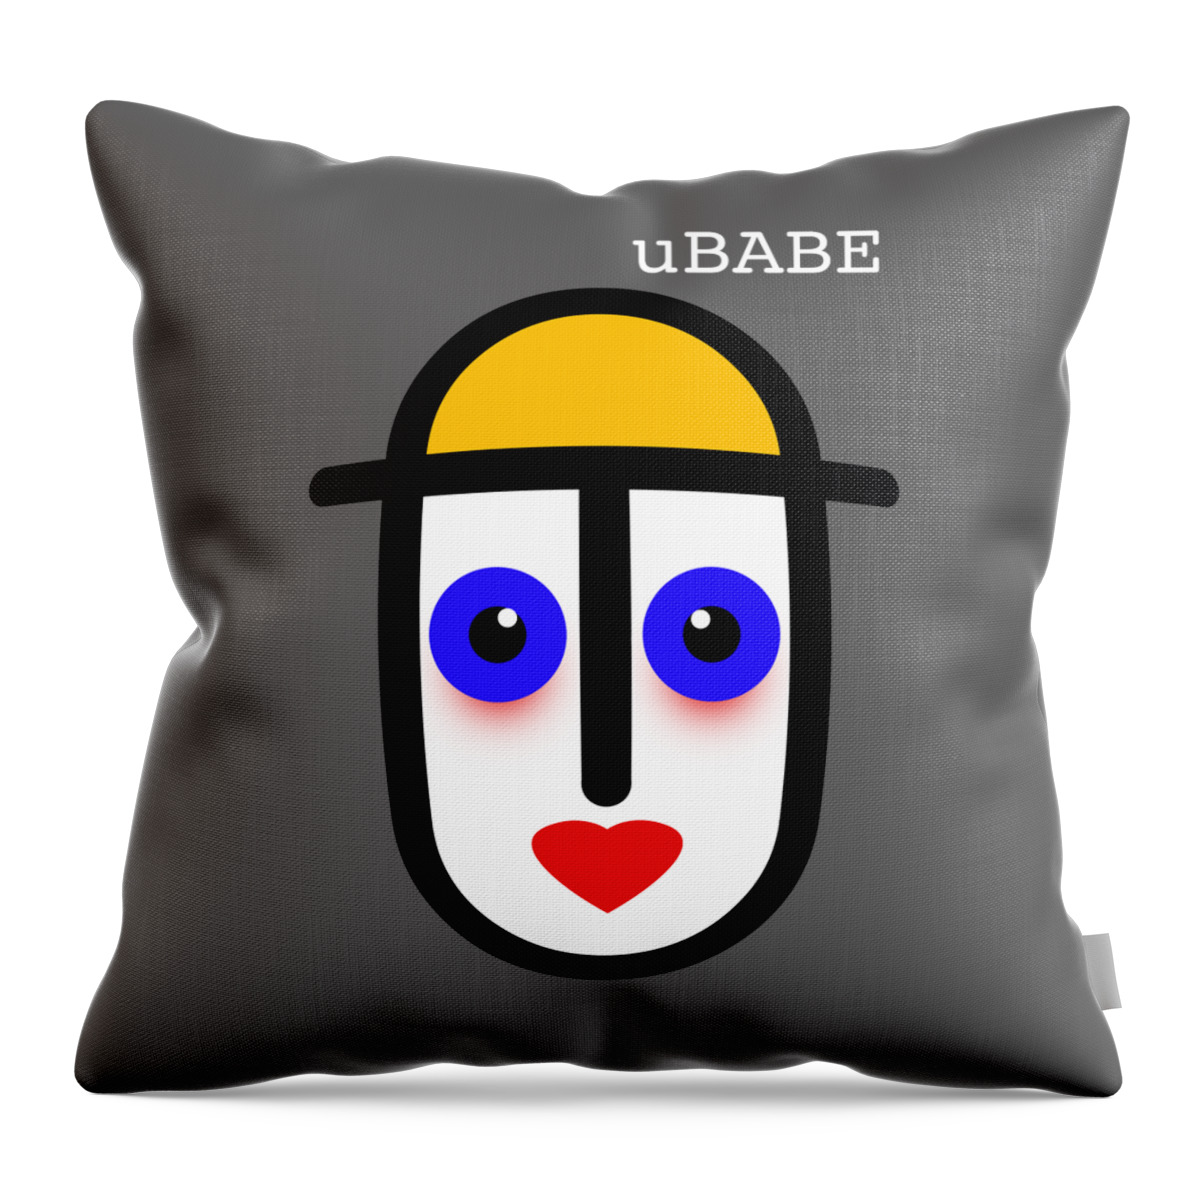 Love Hurts Throw Pillow featuring the digital art Love Hurts by Ubabe Style